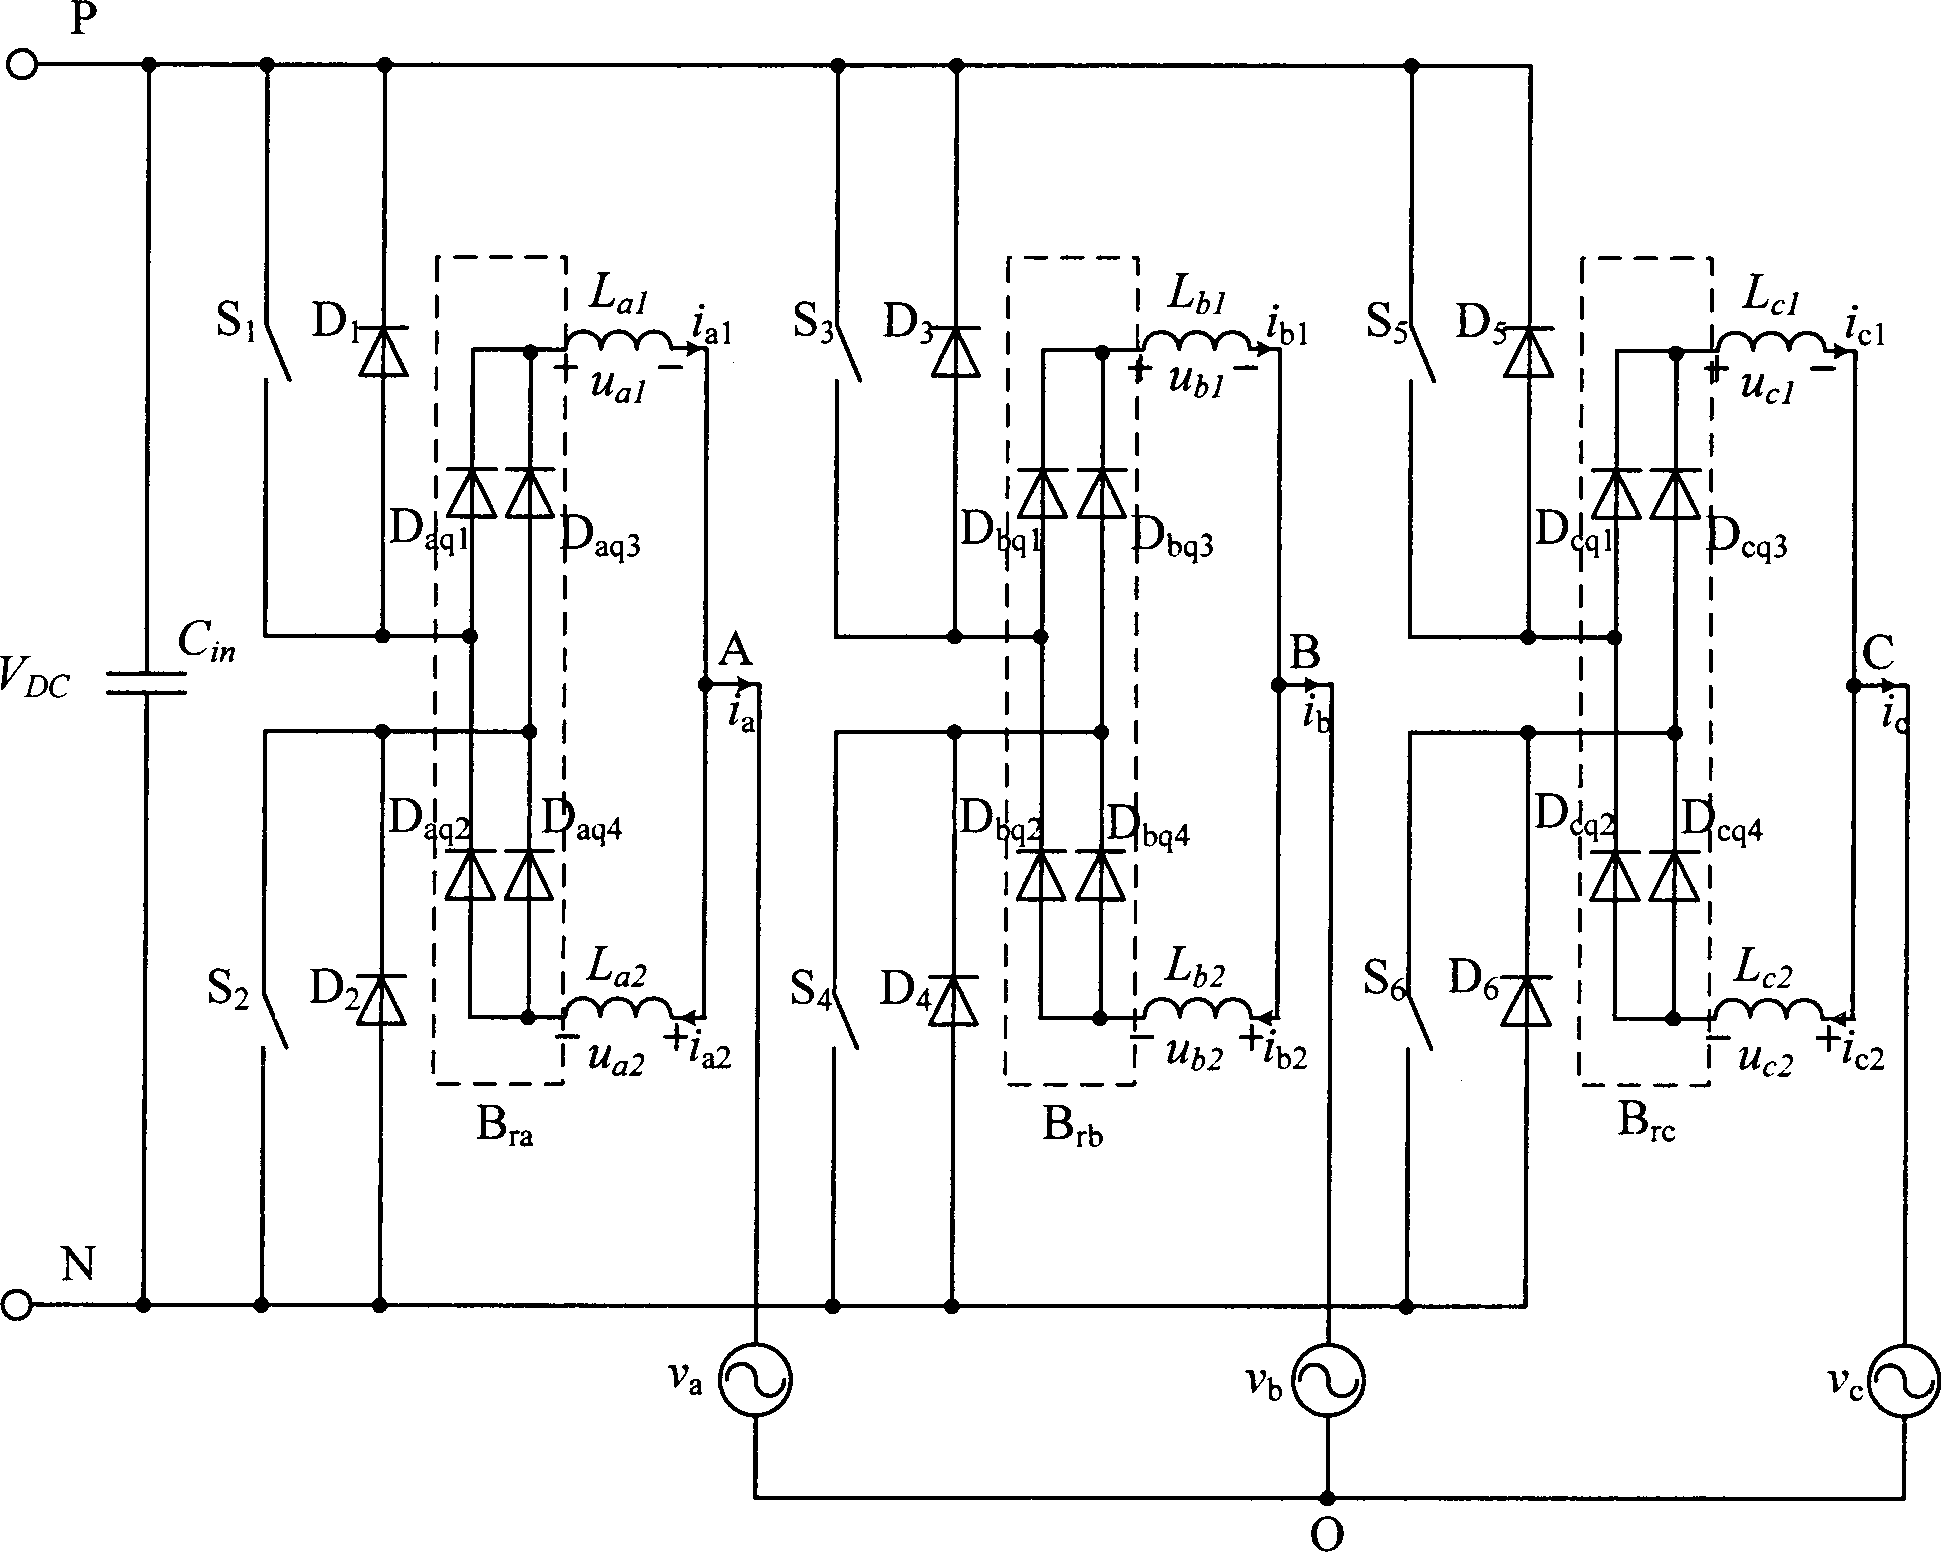 Dead-zone-free three-phase AC/DC converter with high-frequency rectifier bridge